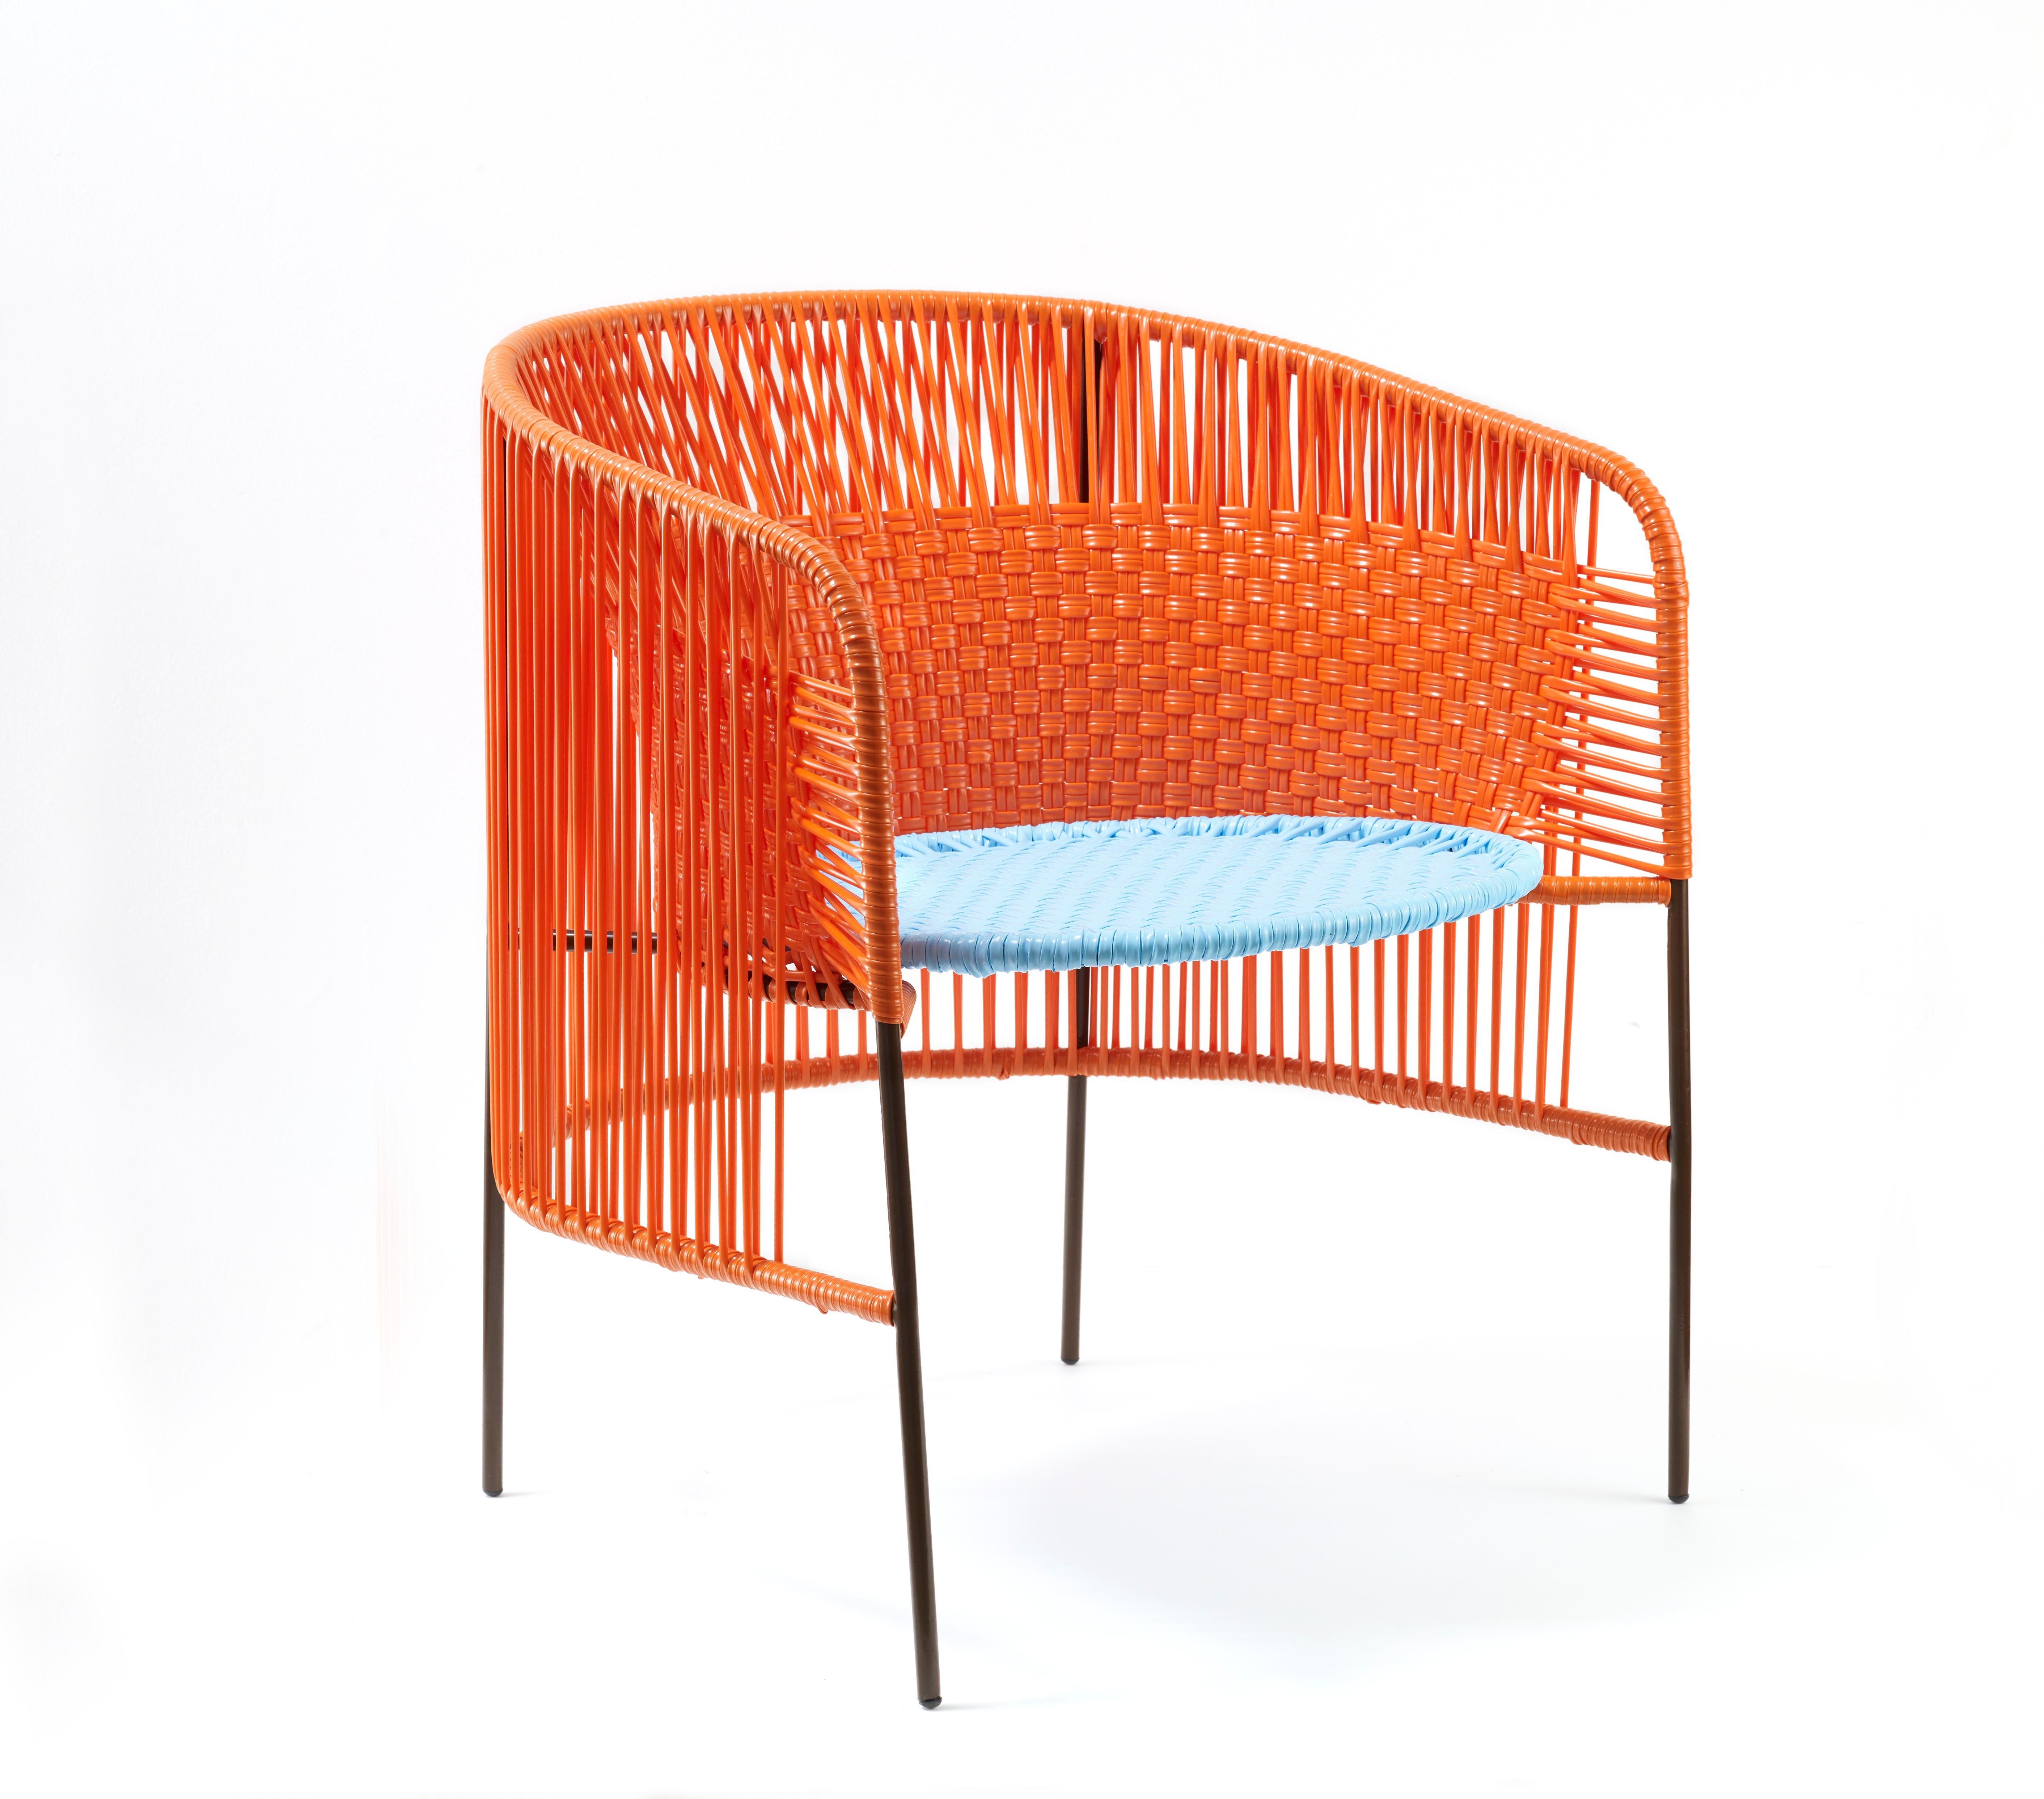 Set of 2 Orange Mint caribe lounge chair by Sebastian Herkner
Materials: Galvanized and powder-coated tubular steel. PVC strings are made from recycled plastic.
Technique: Made from recycled plastic and weaved by local craftspeople in Colombia.